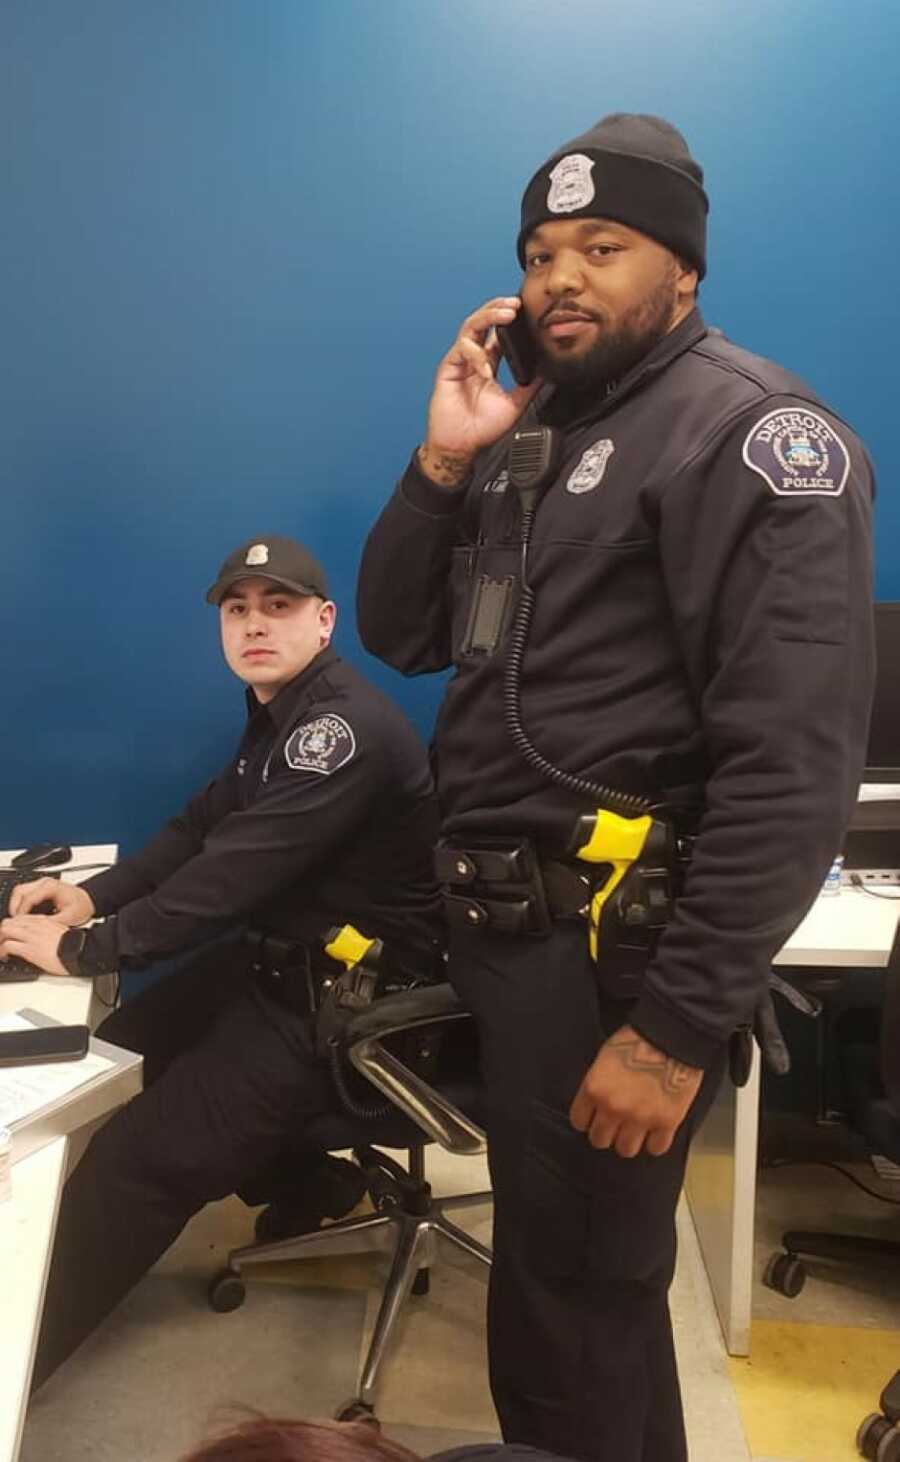 officer answering the phone at the office